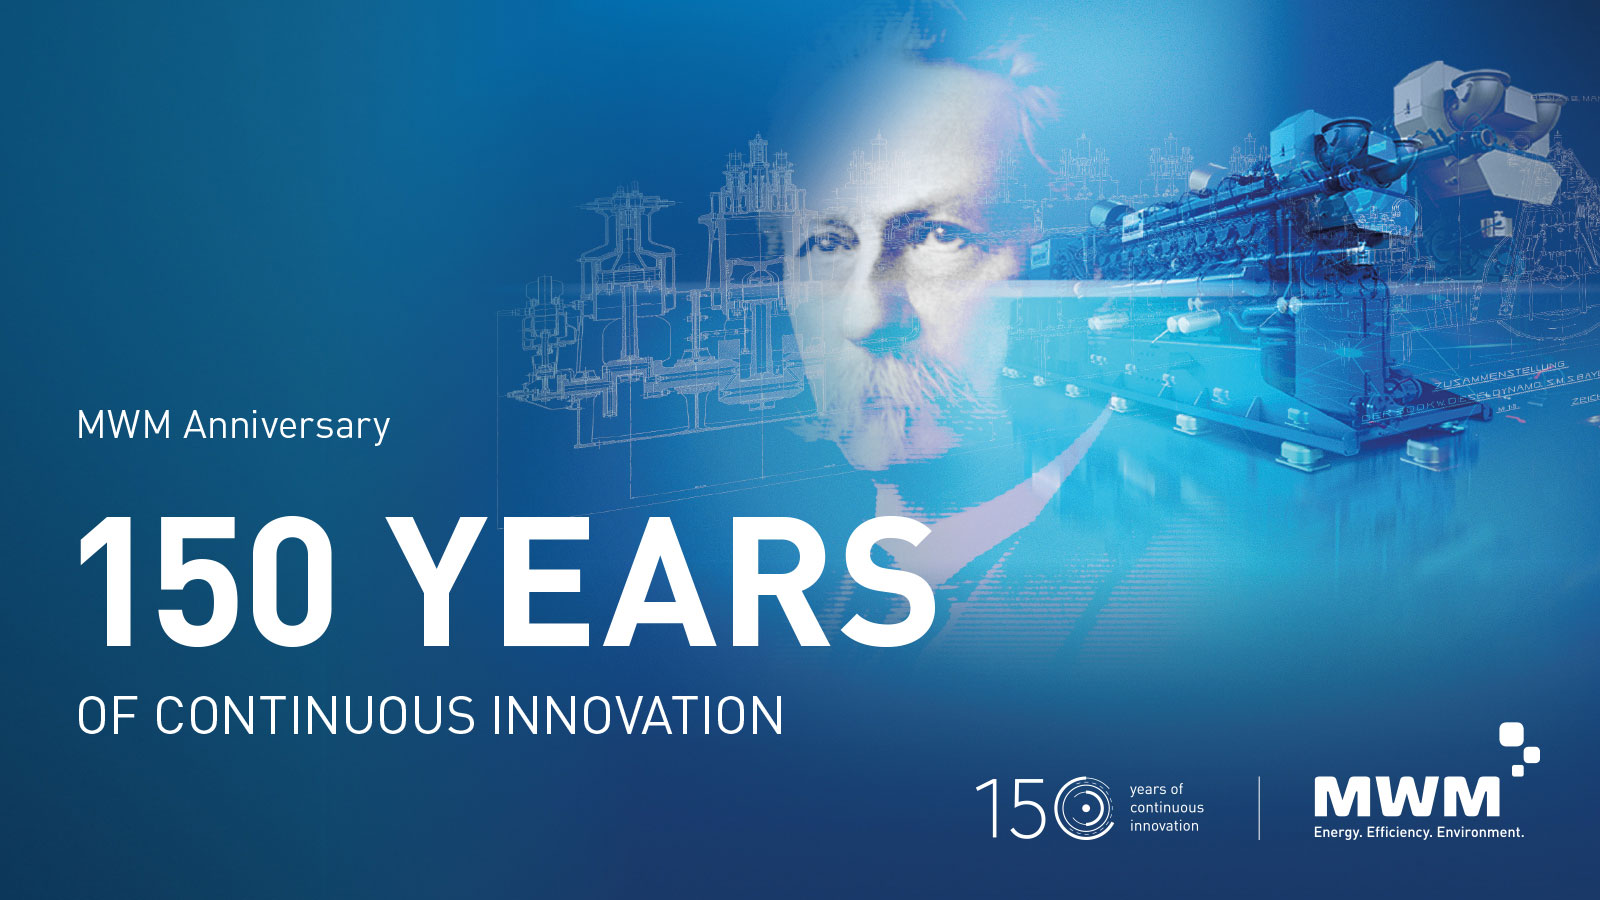 150 Years of Innovation and Progress in Distributed Energy Generation with Highly Efficient Gas Engines